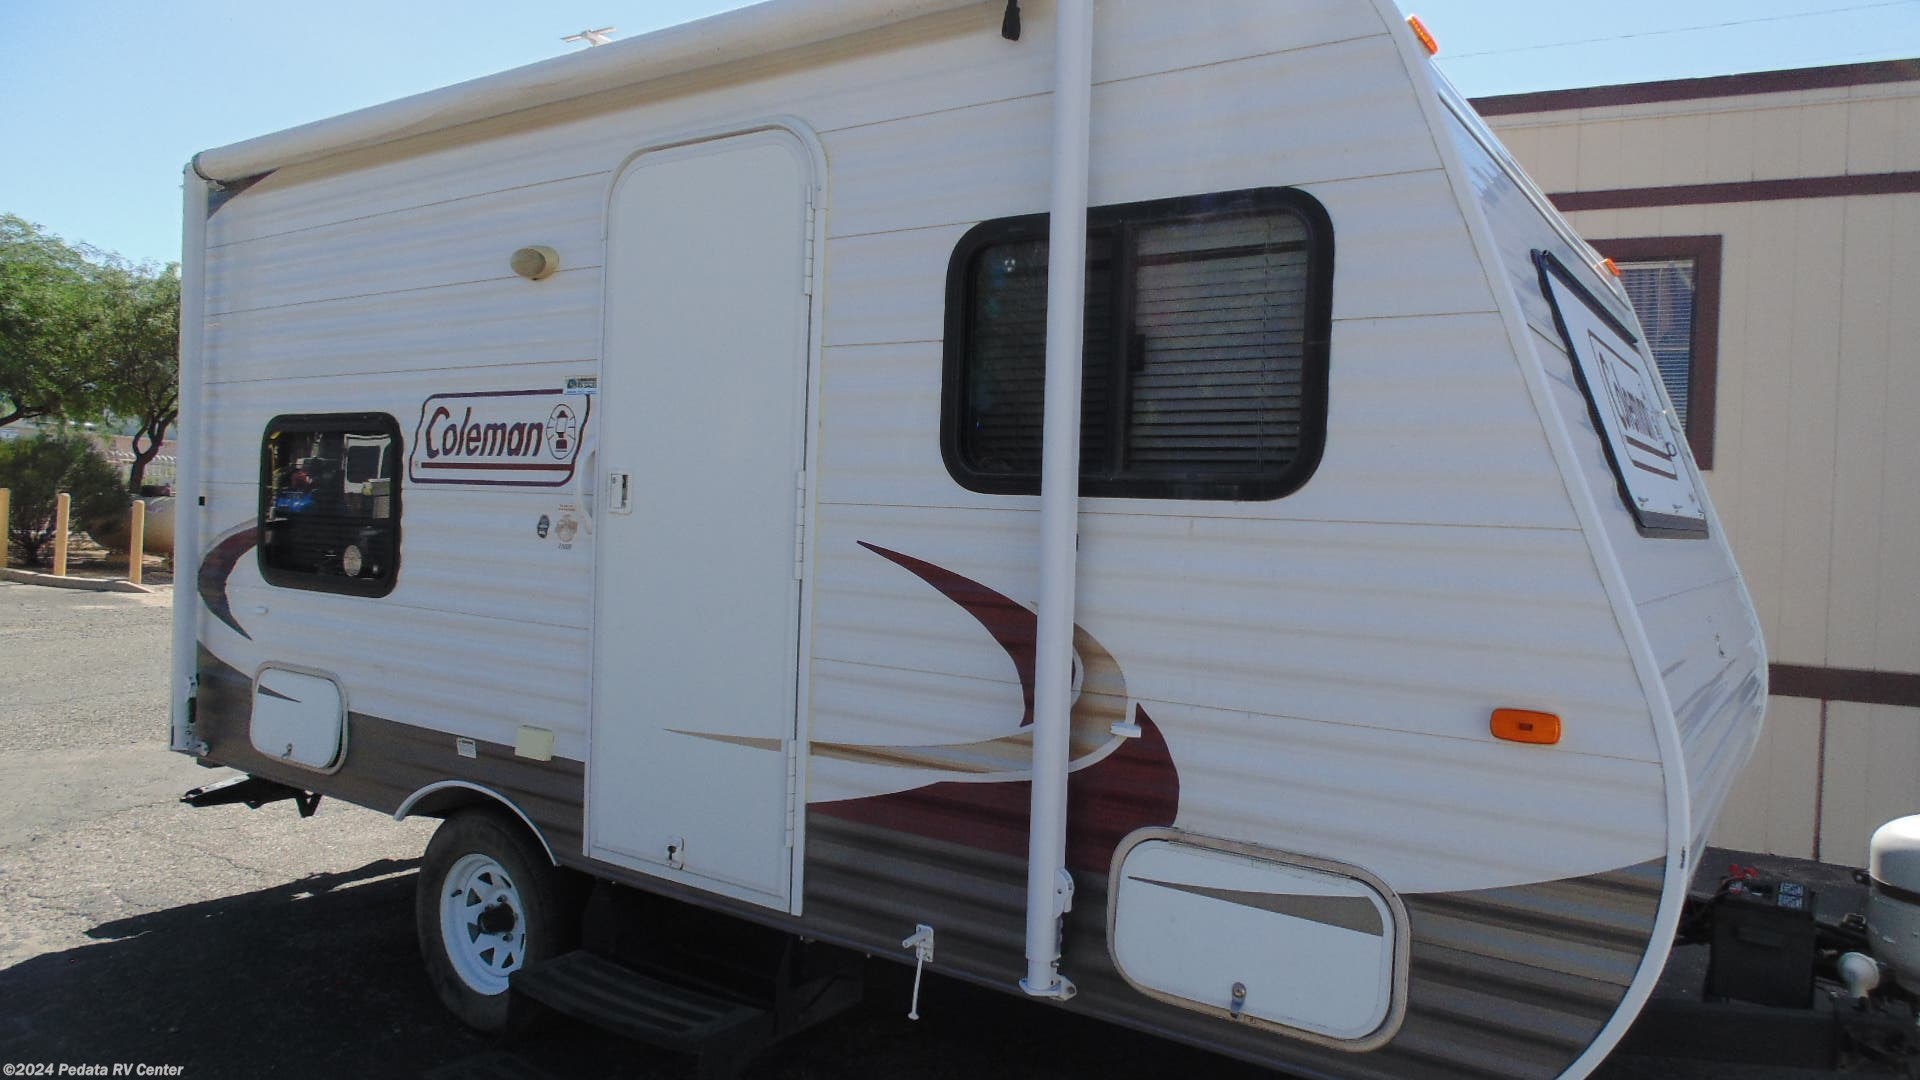 #12007 - Used 2012 Coleman 15BH Travel Trailer RV For Sale 2012 Coleman Travel Trailer For Sale